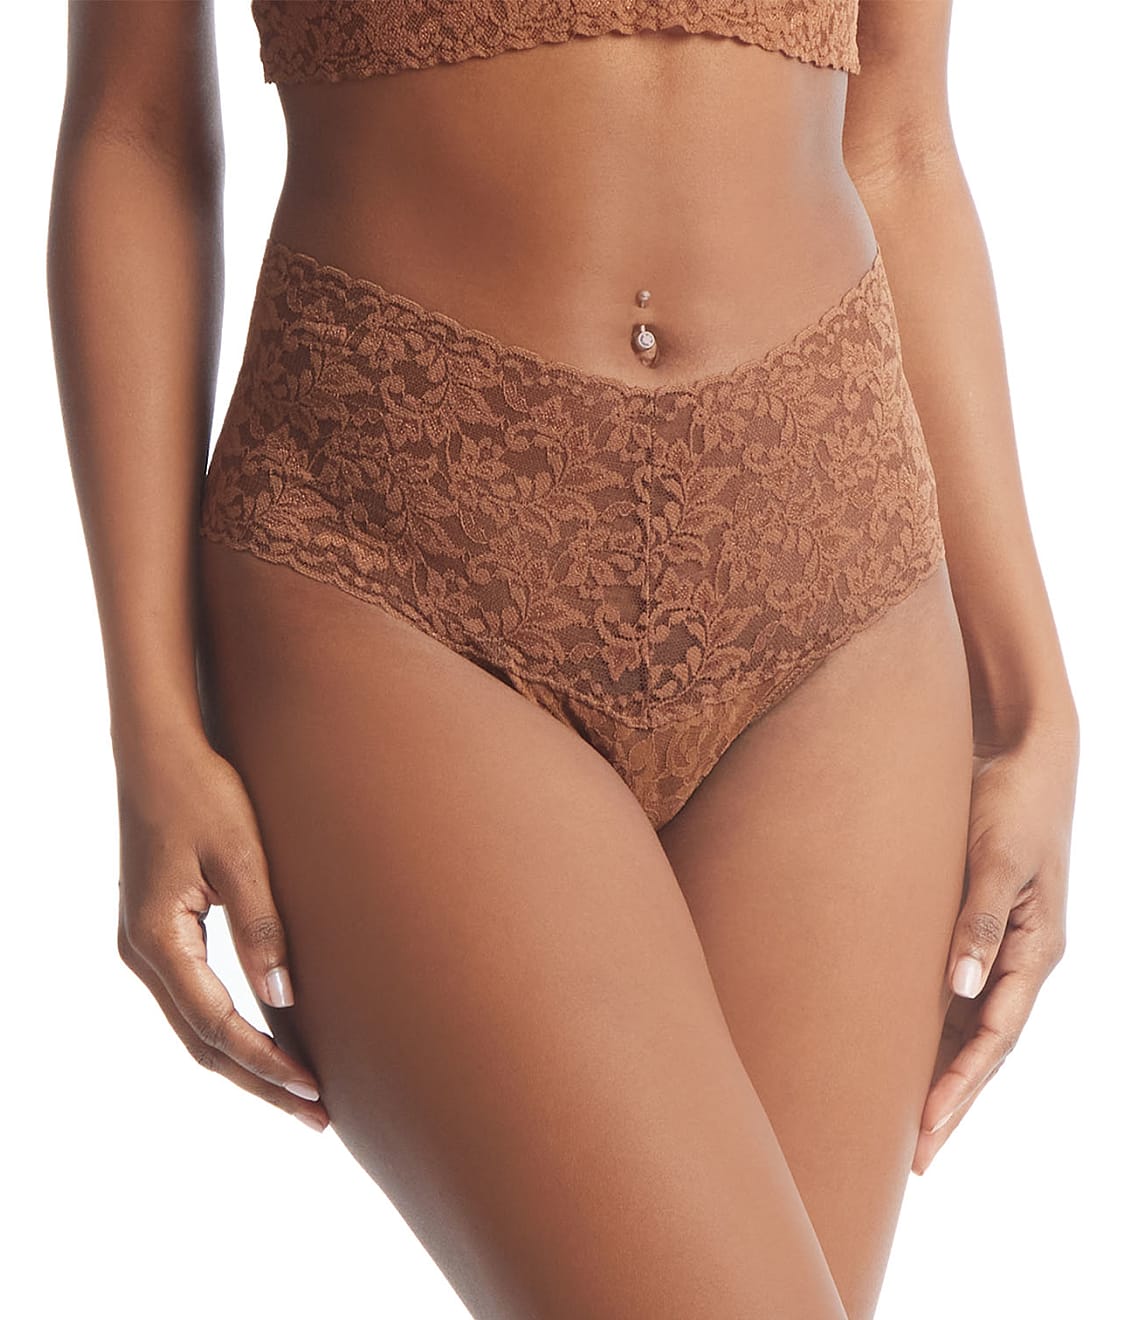 Hanky Panky Signature Lace Boy Short In Stock At UK Tights